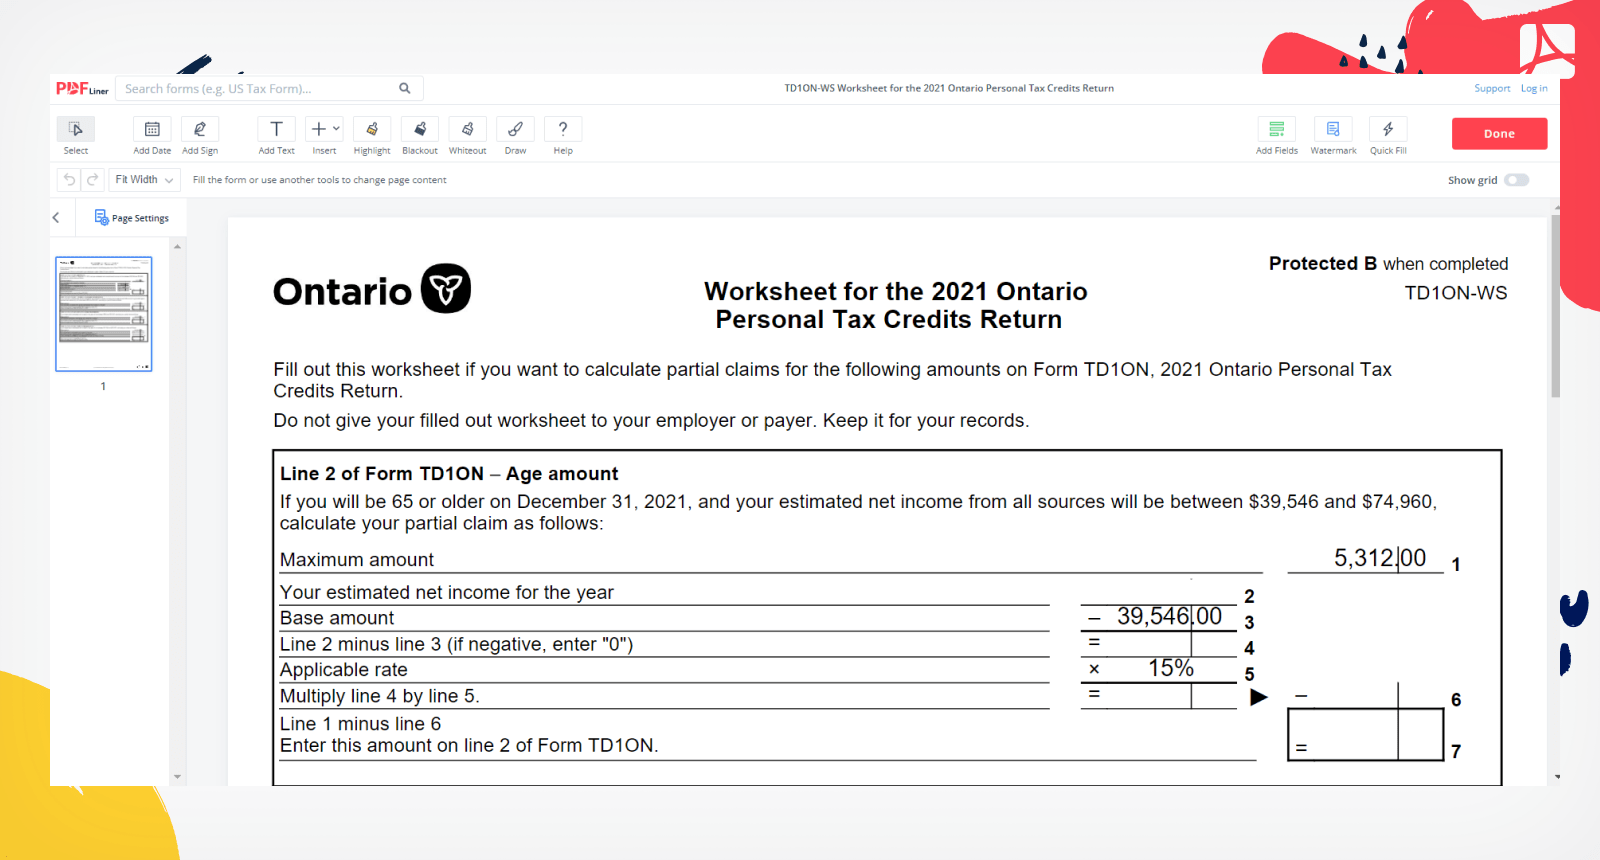 TD1ON-WS Worksheet for the 2021 Ontario Personal Tax Credits Return on PDFLiner